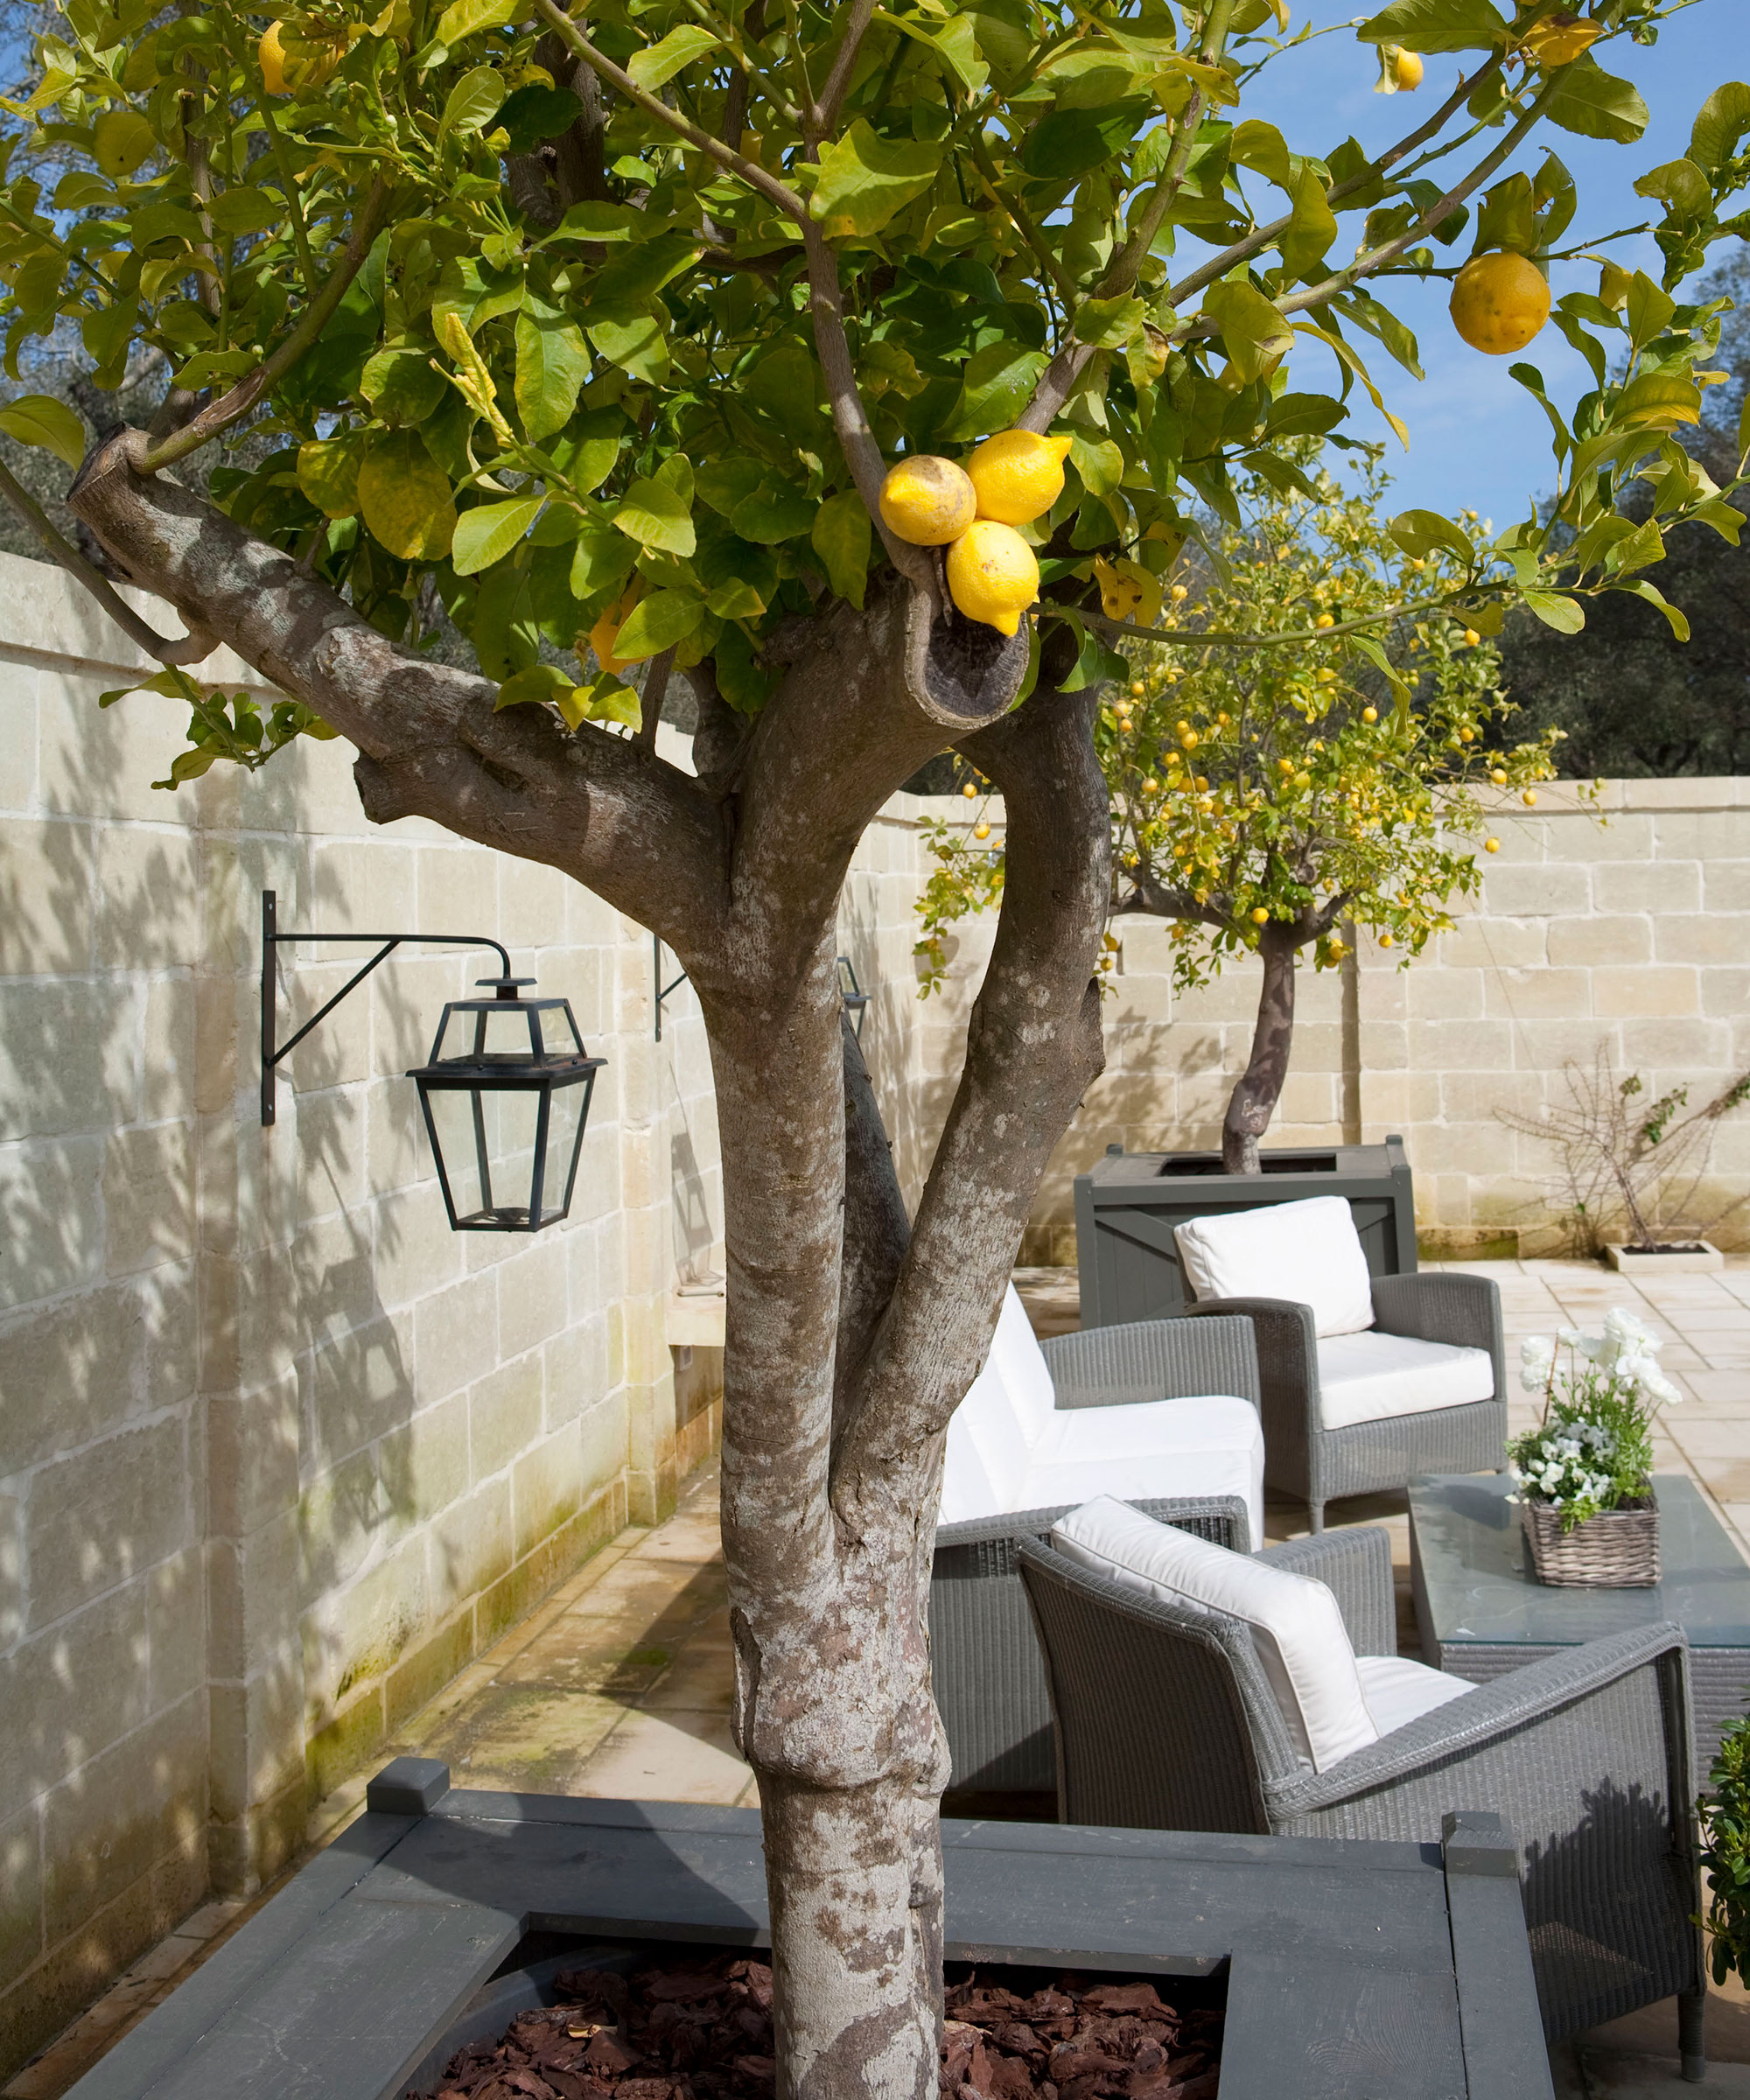 A small, walled courtyard garden idea with a lemon tree growing out of a square planter, and dark gray wicker outdoor seating around a coffee table.